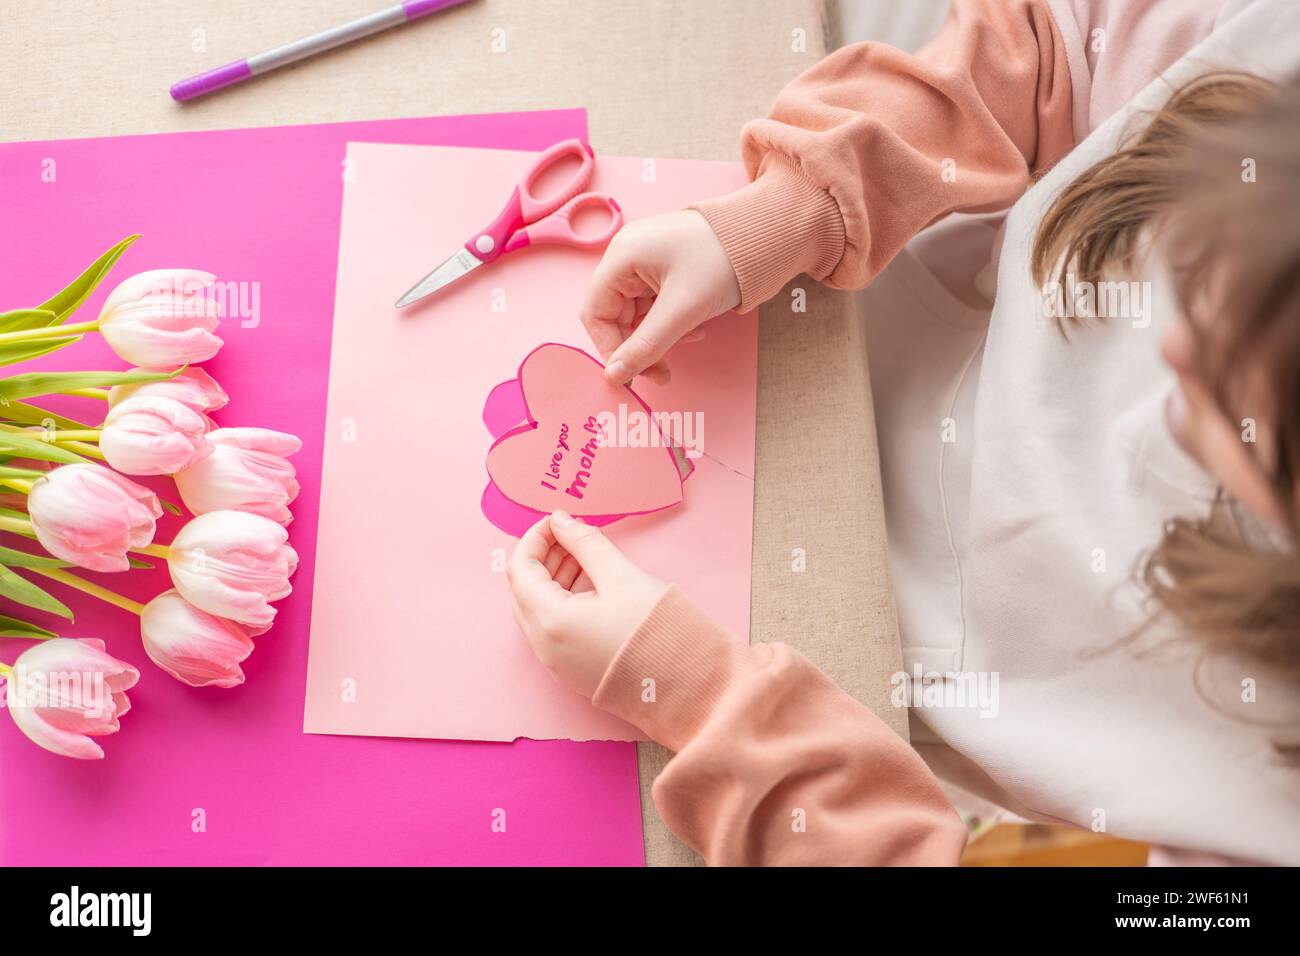 I love you, Mom.moms day concept. Childrens hands holding a heart card.Pink heart card and pink tulips.Flowers and cards for mom. Stock Photo